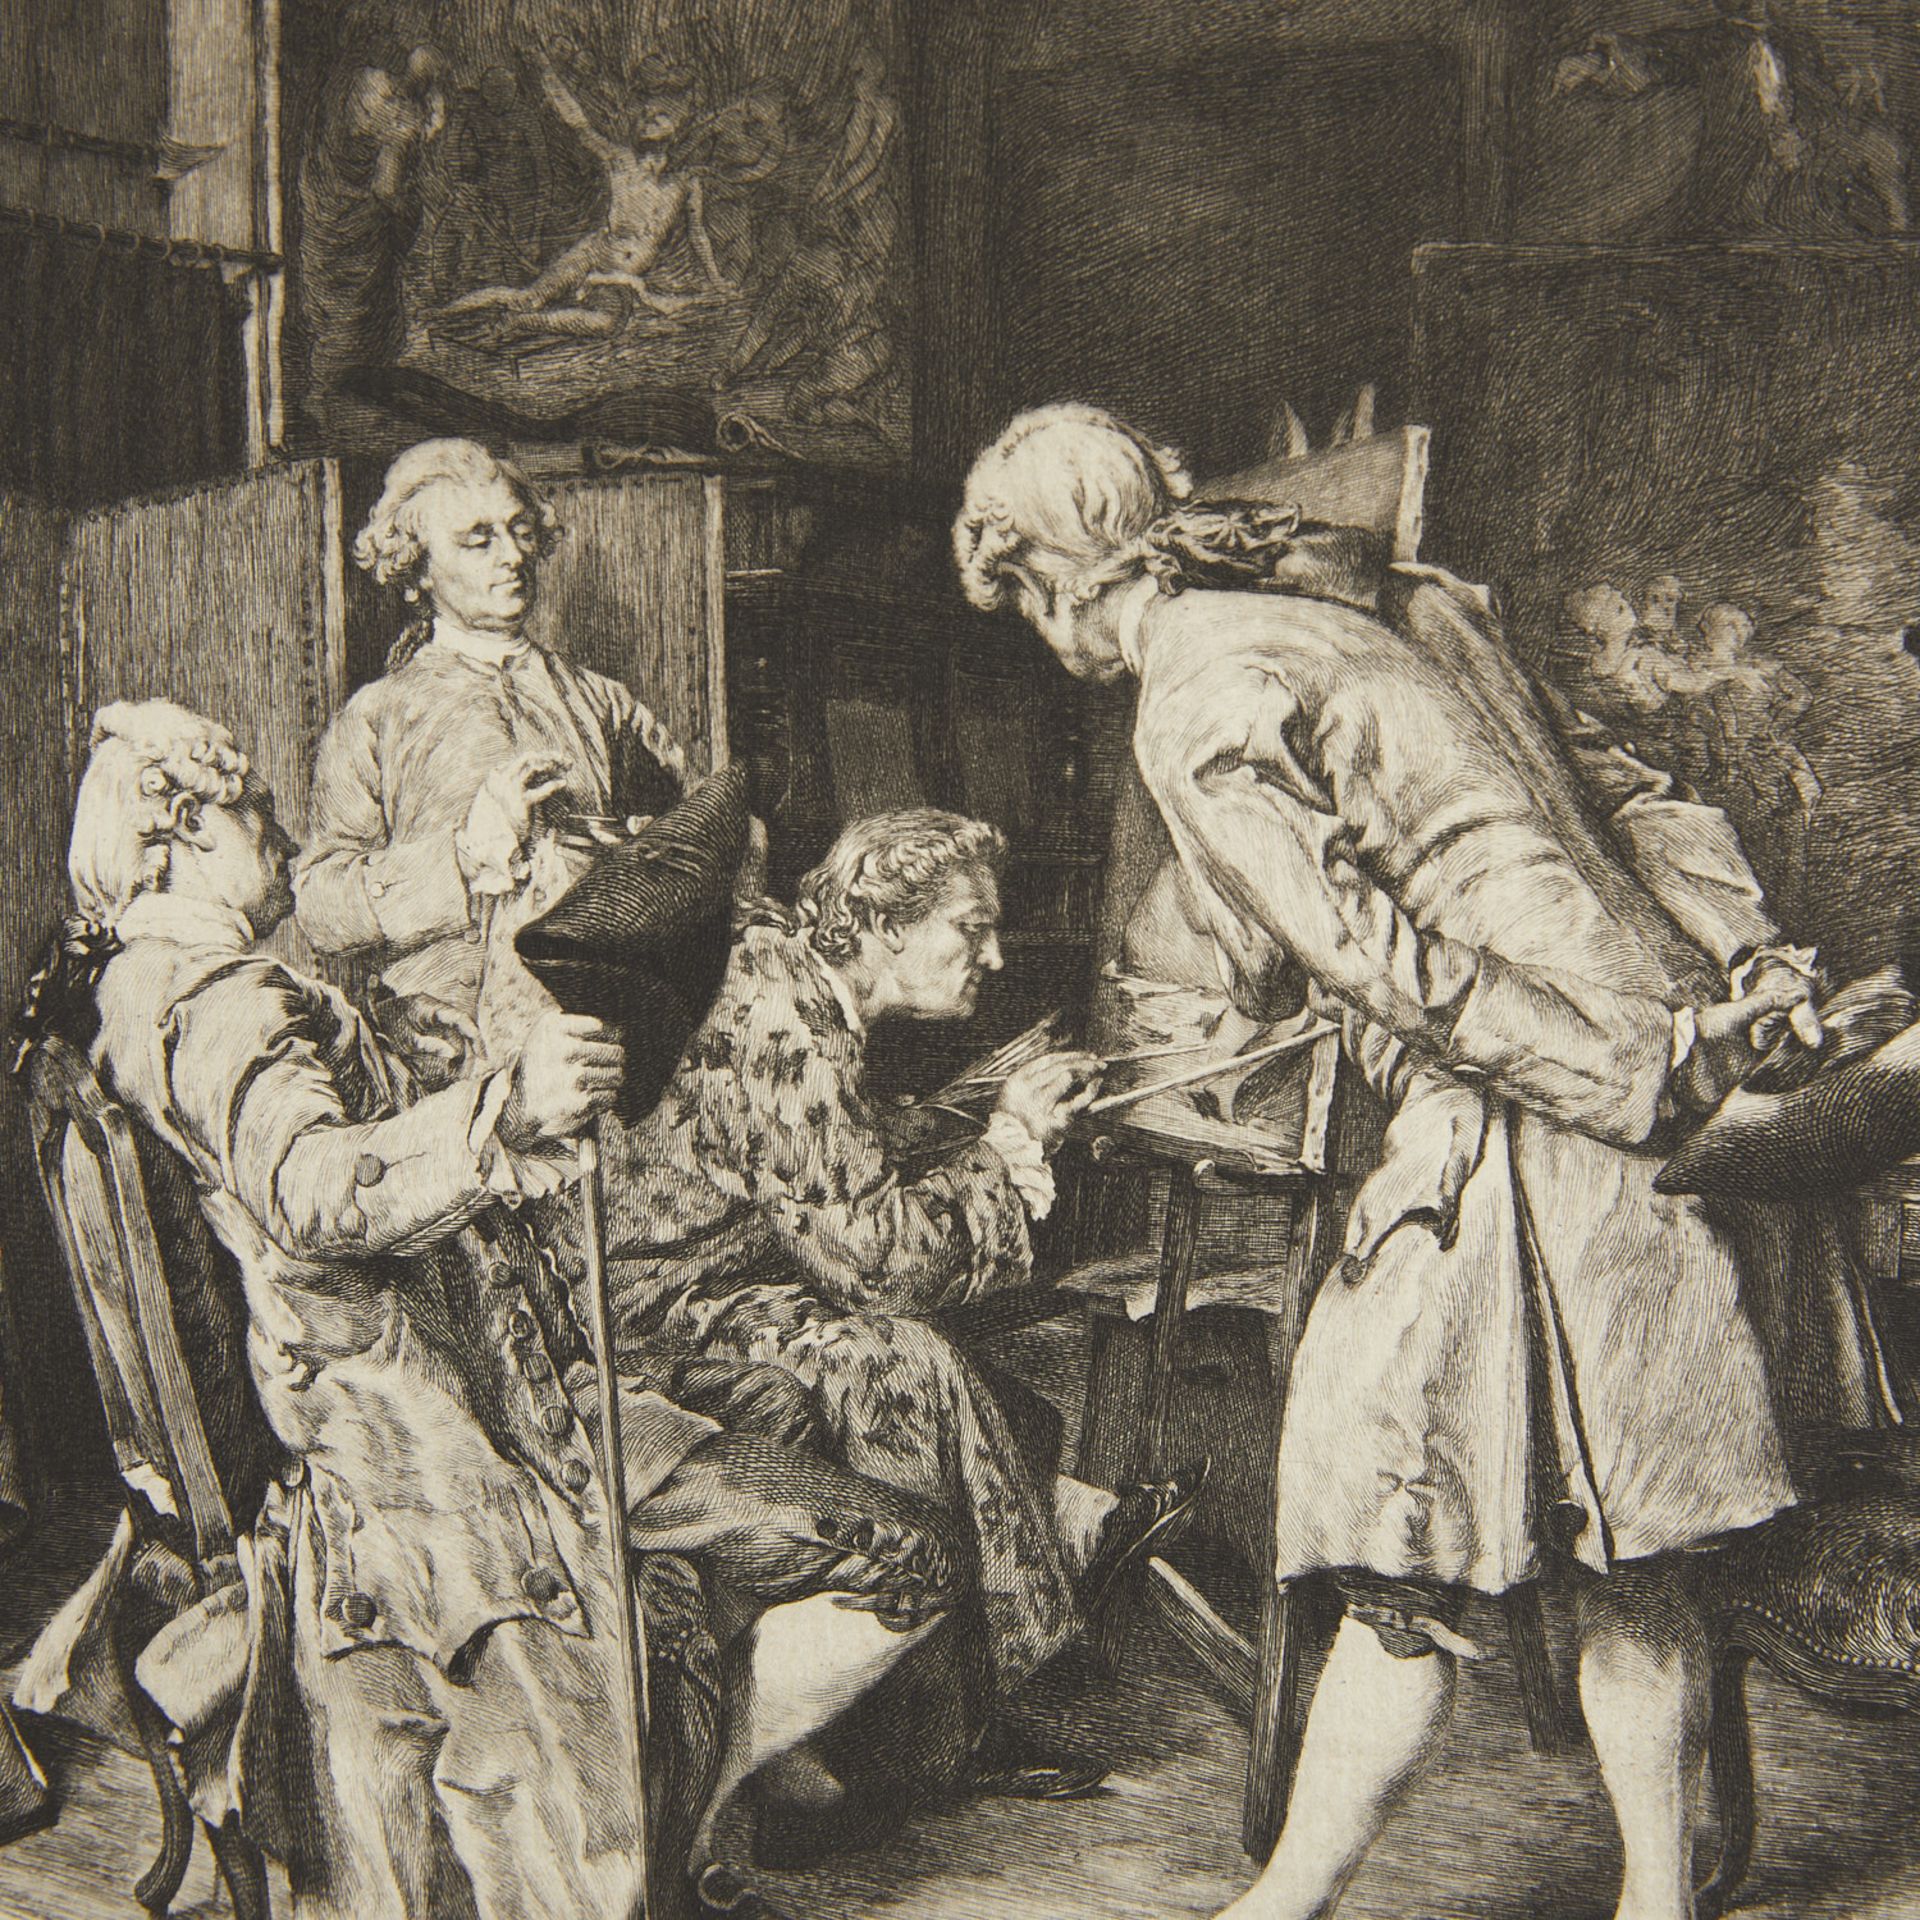 Vion "The Critics of Painting" After Meissonier - Image 4 of 6